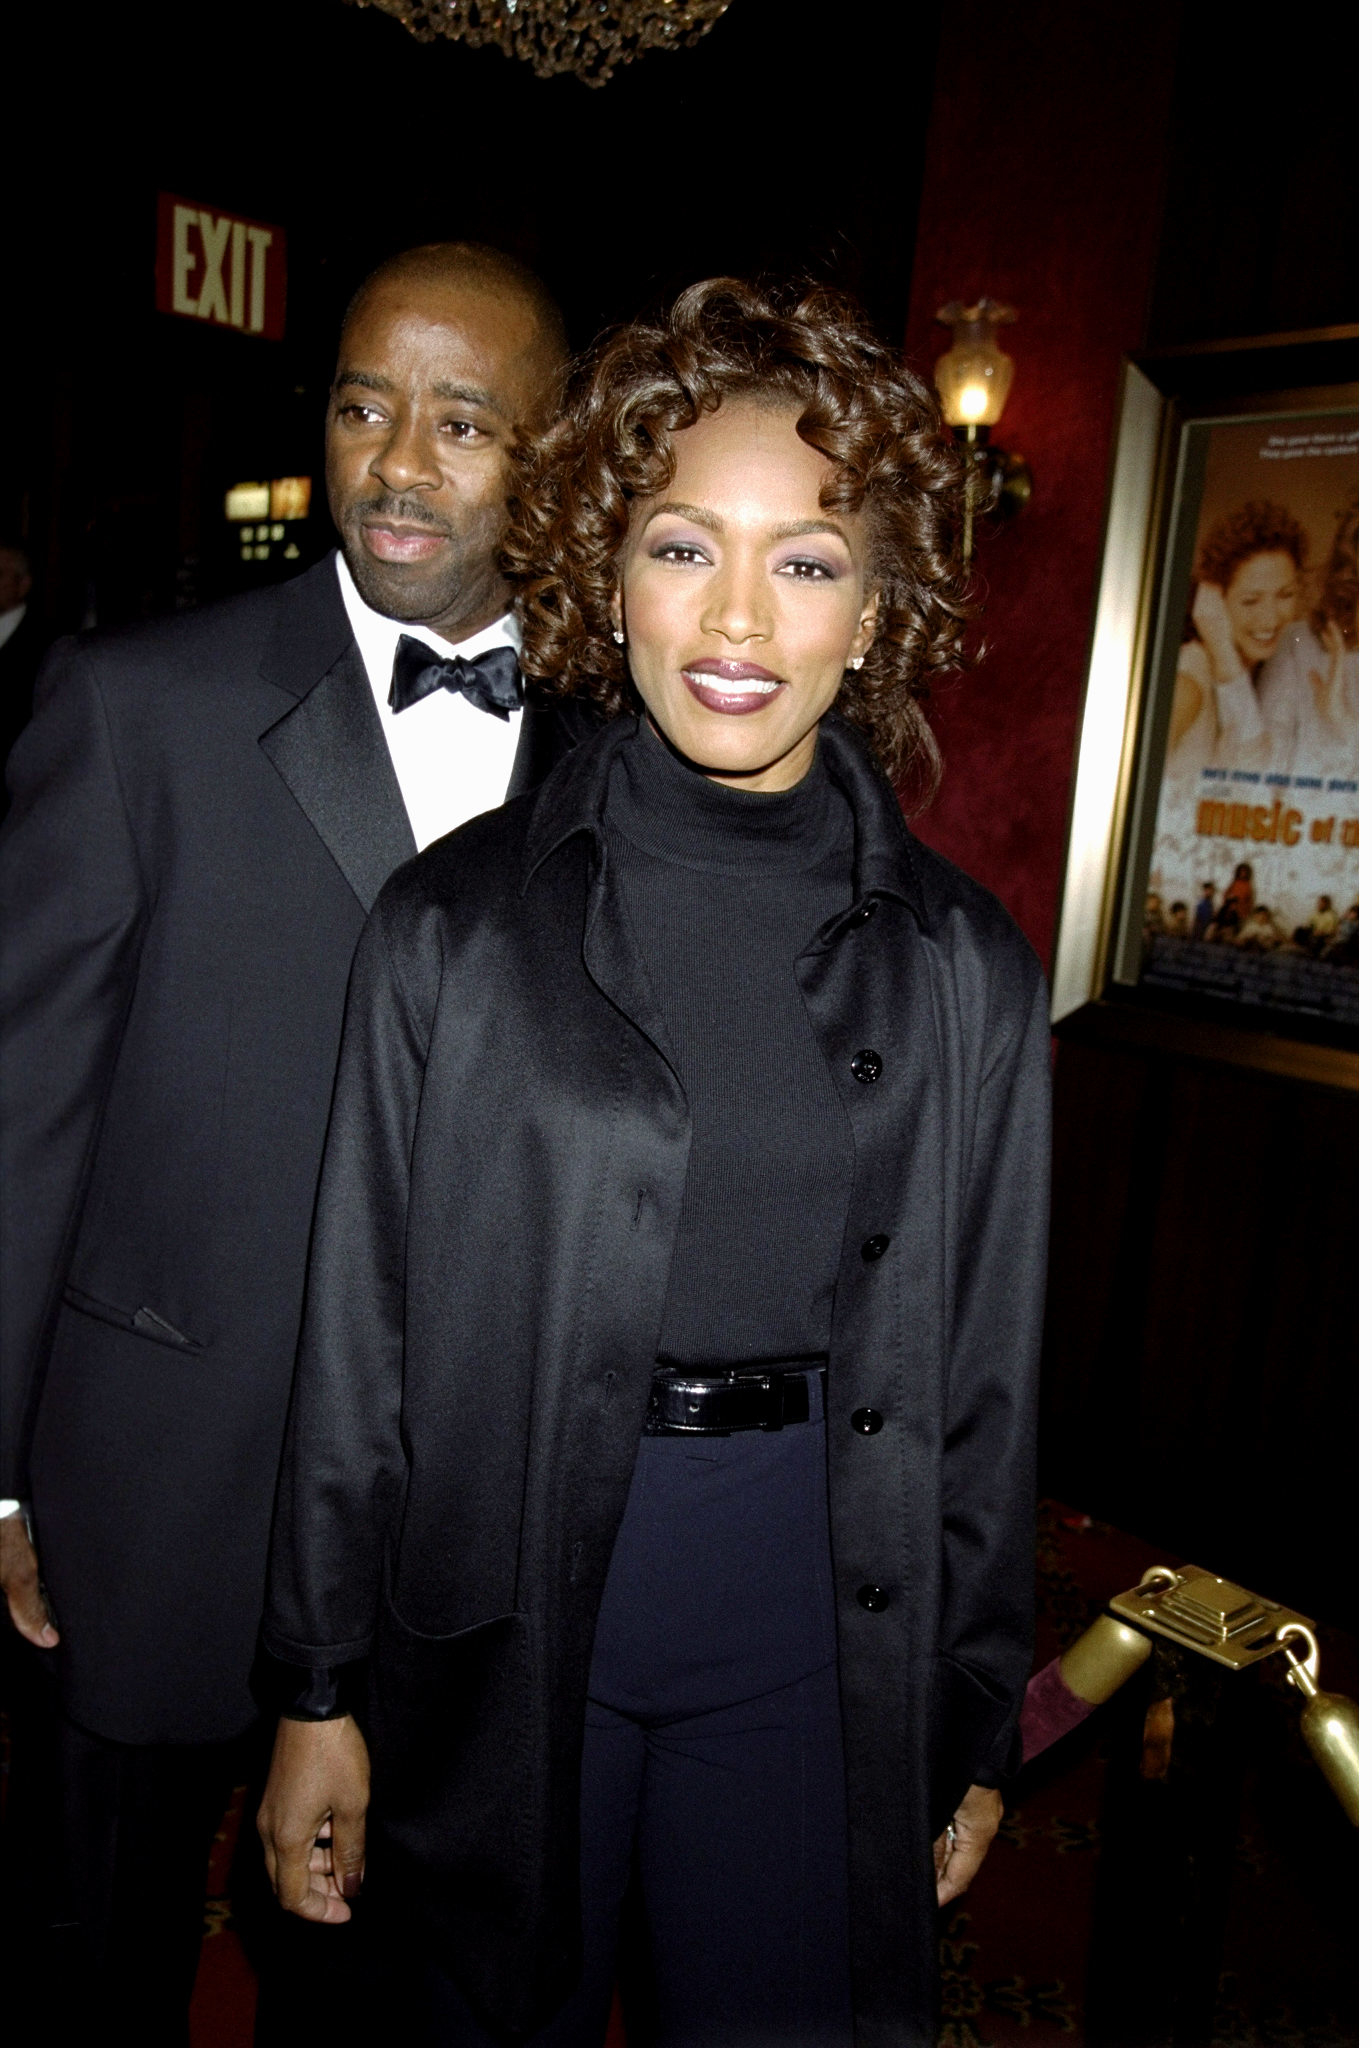 Two people posing together, one in a black suit and bowtie, and the other in a black coat and scarf